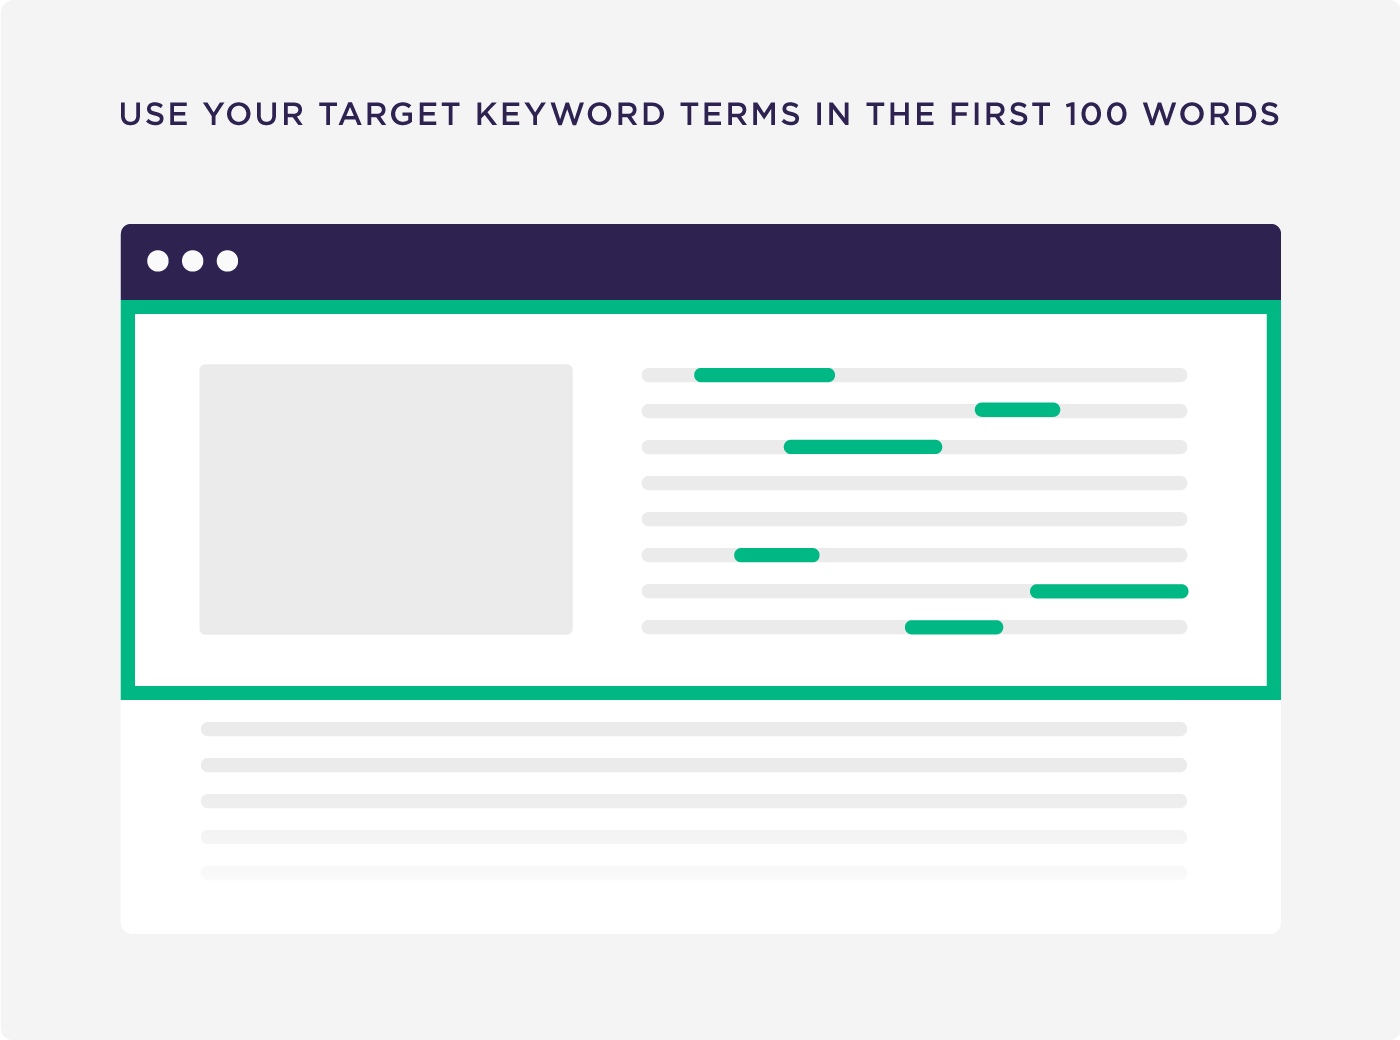 Use your target keyword terms in the first 100 words